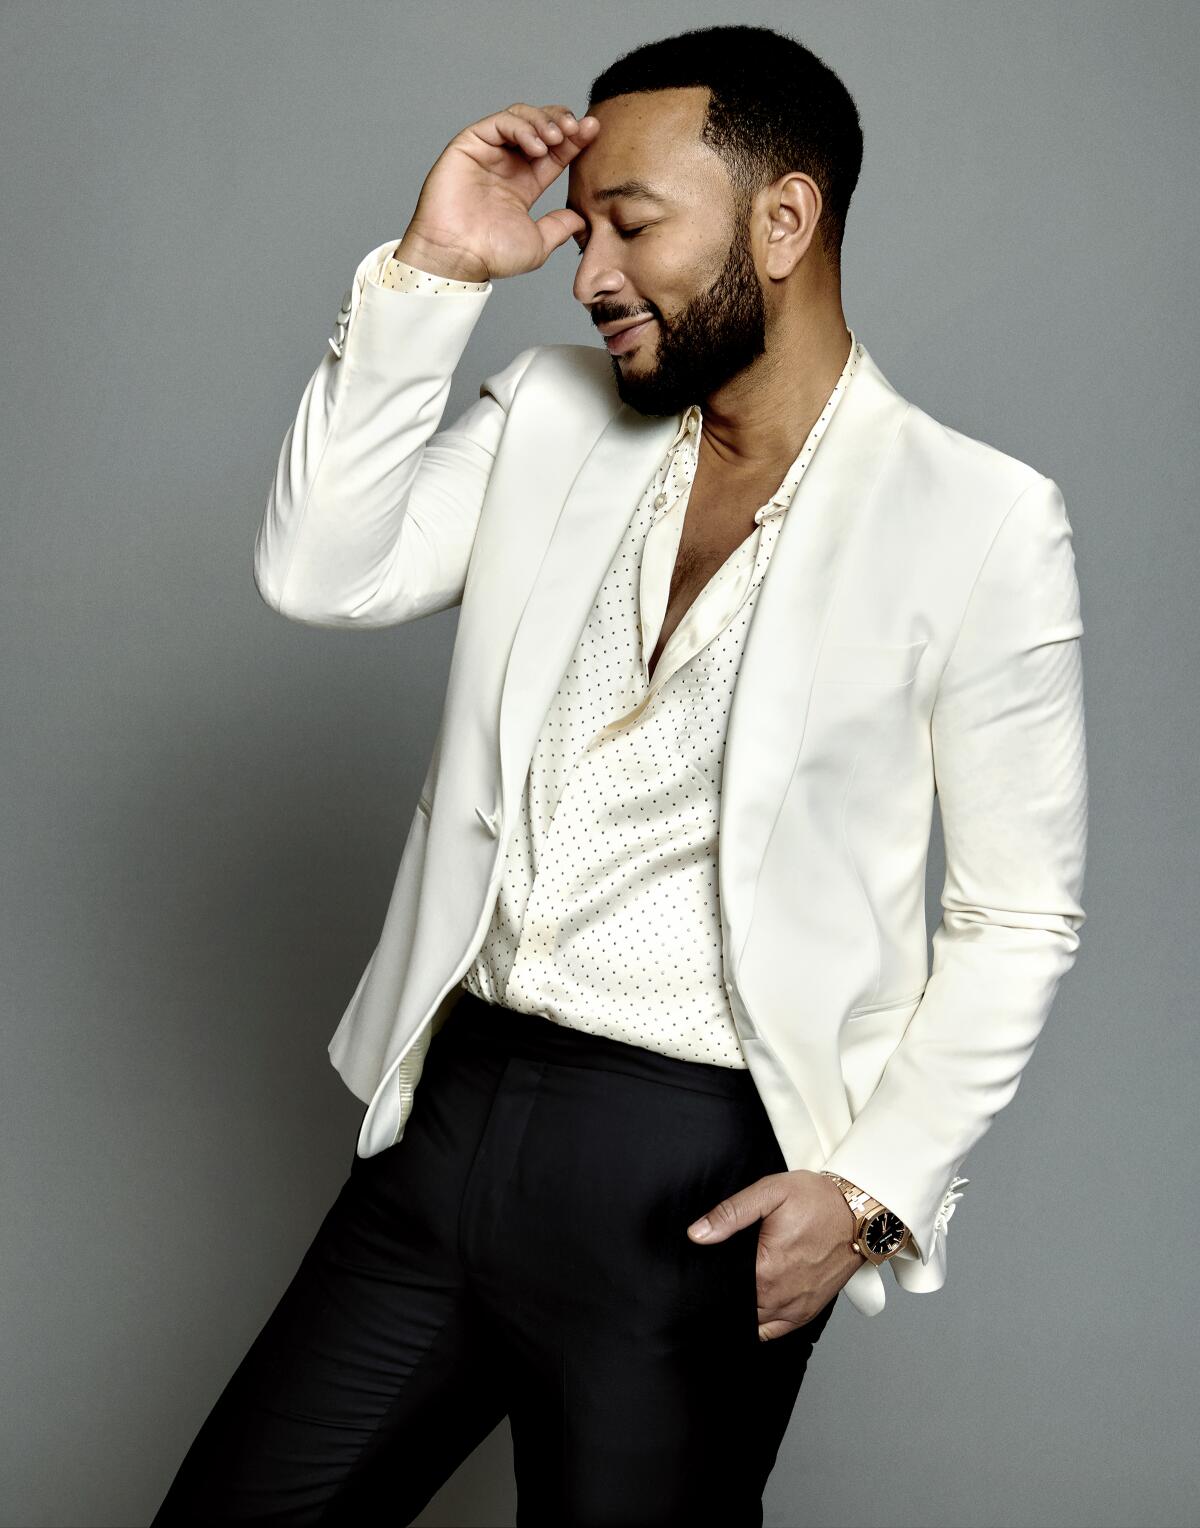 "I'm a singer who also plays piano," says 12-time Grammy Award-winner John Legend.